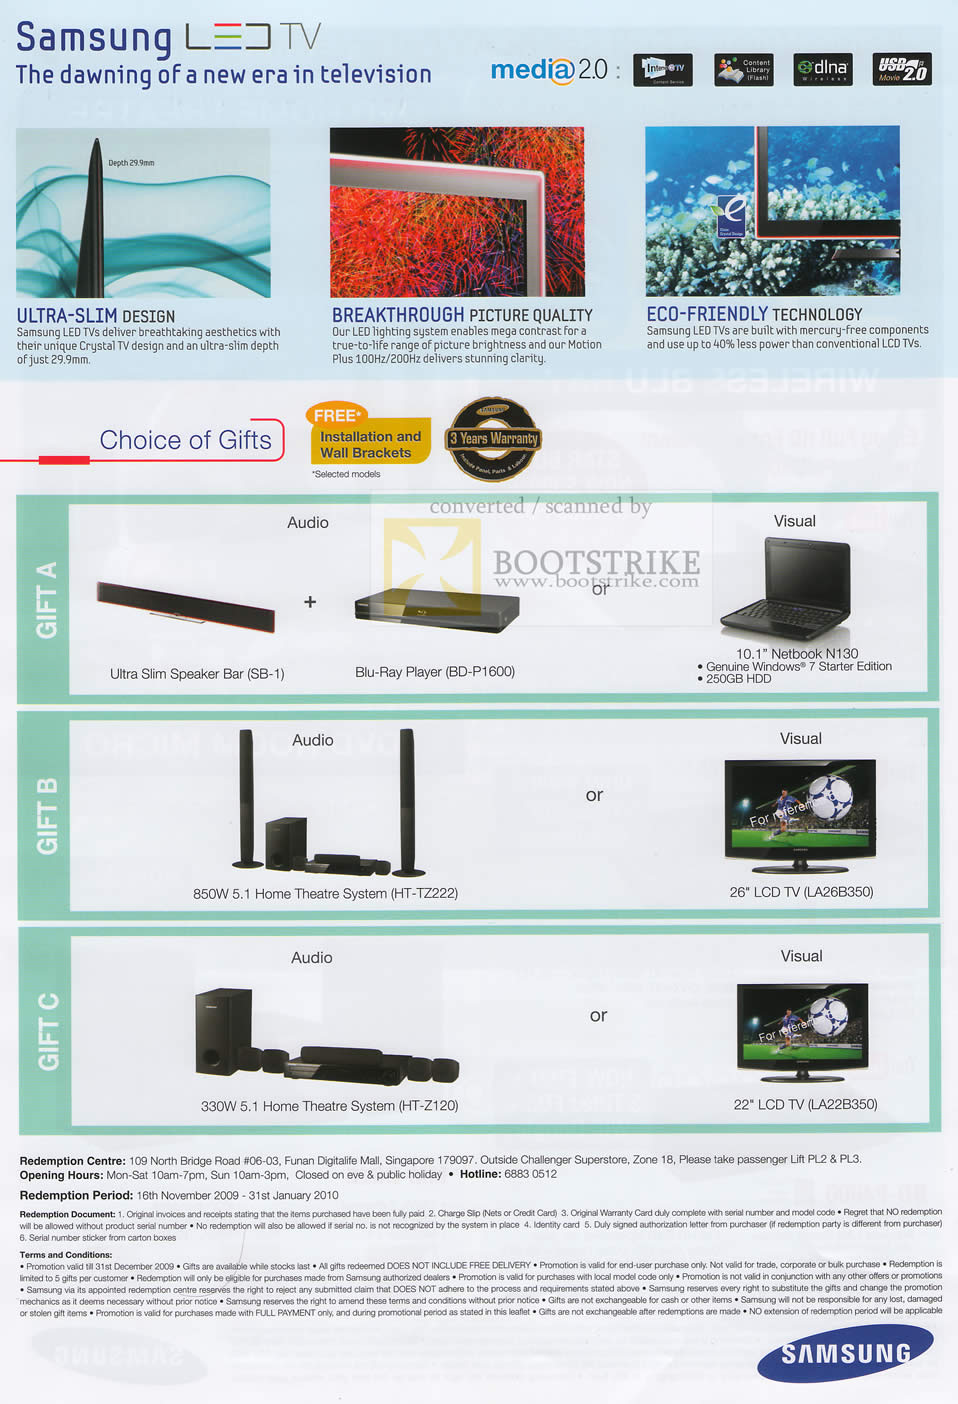 Sitex 2009 price list image brochure of Samsung LED TV Choice Of Gifts